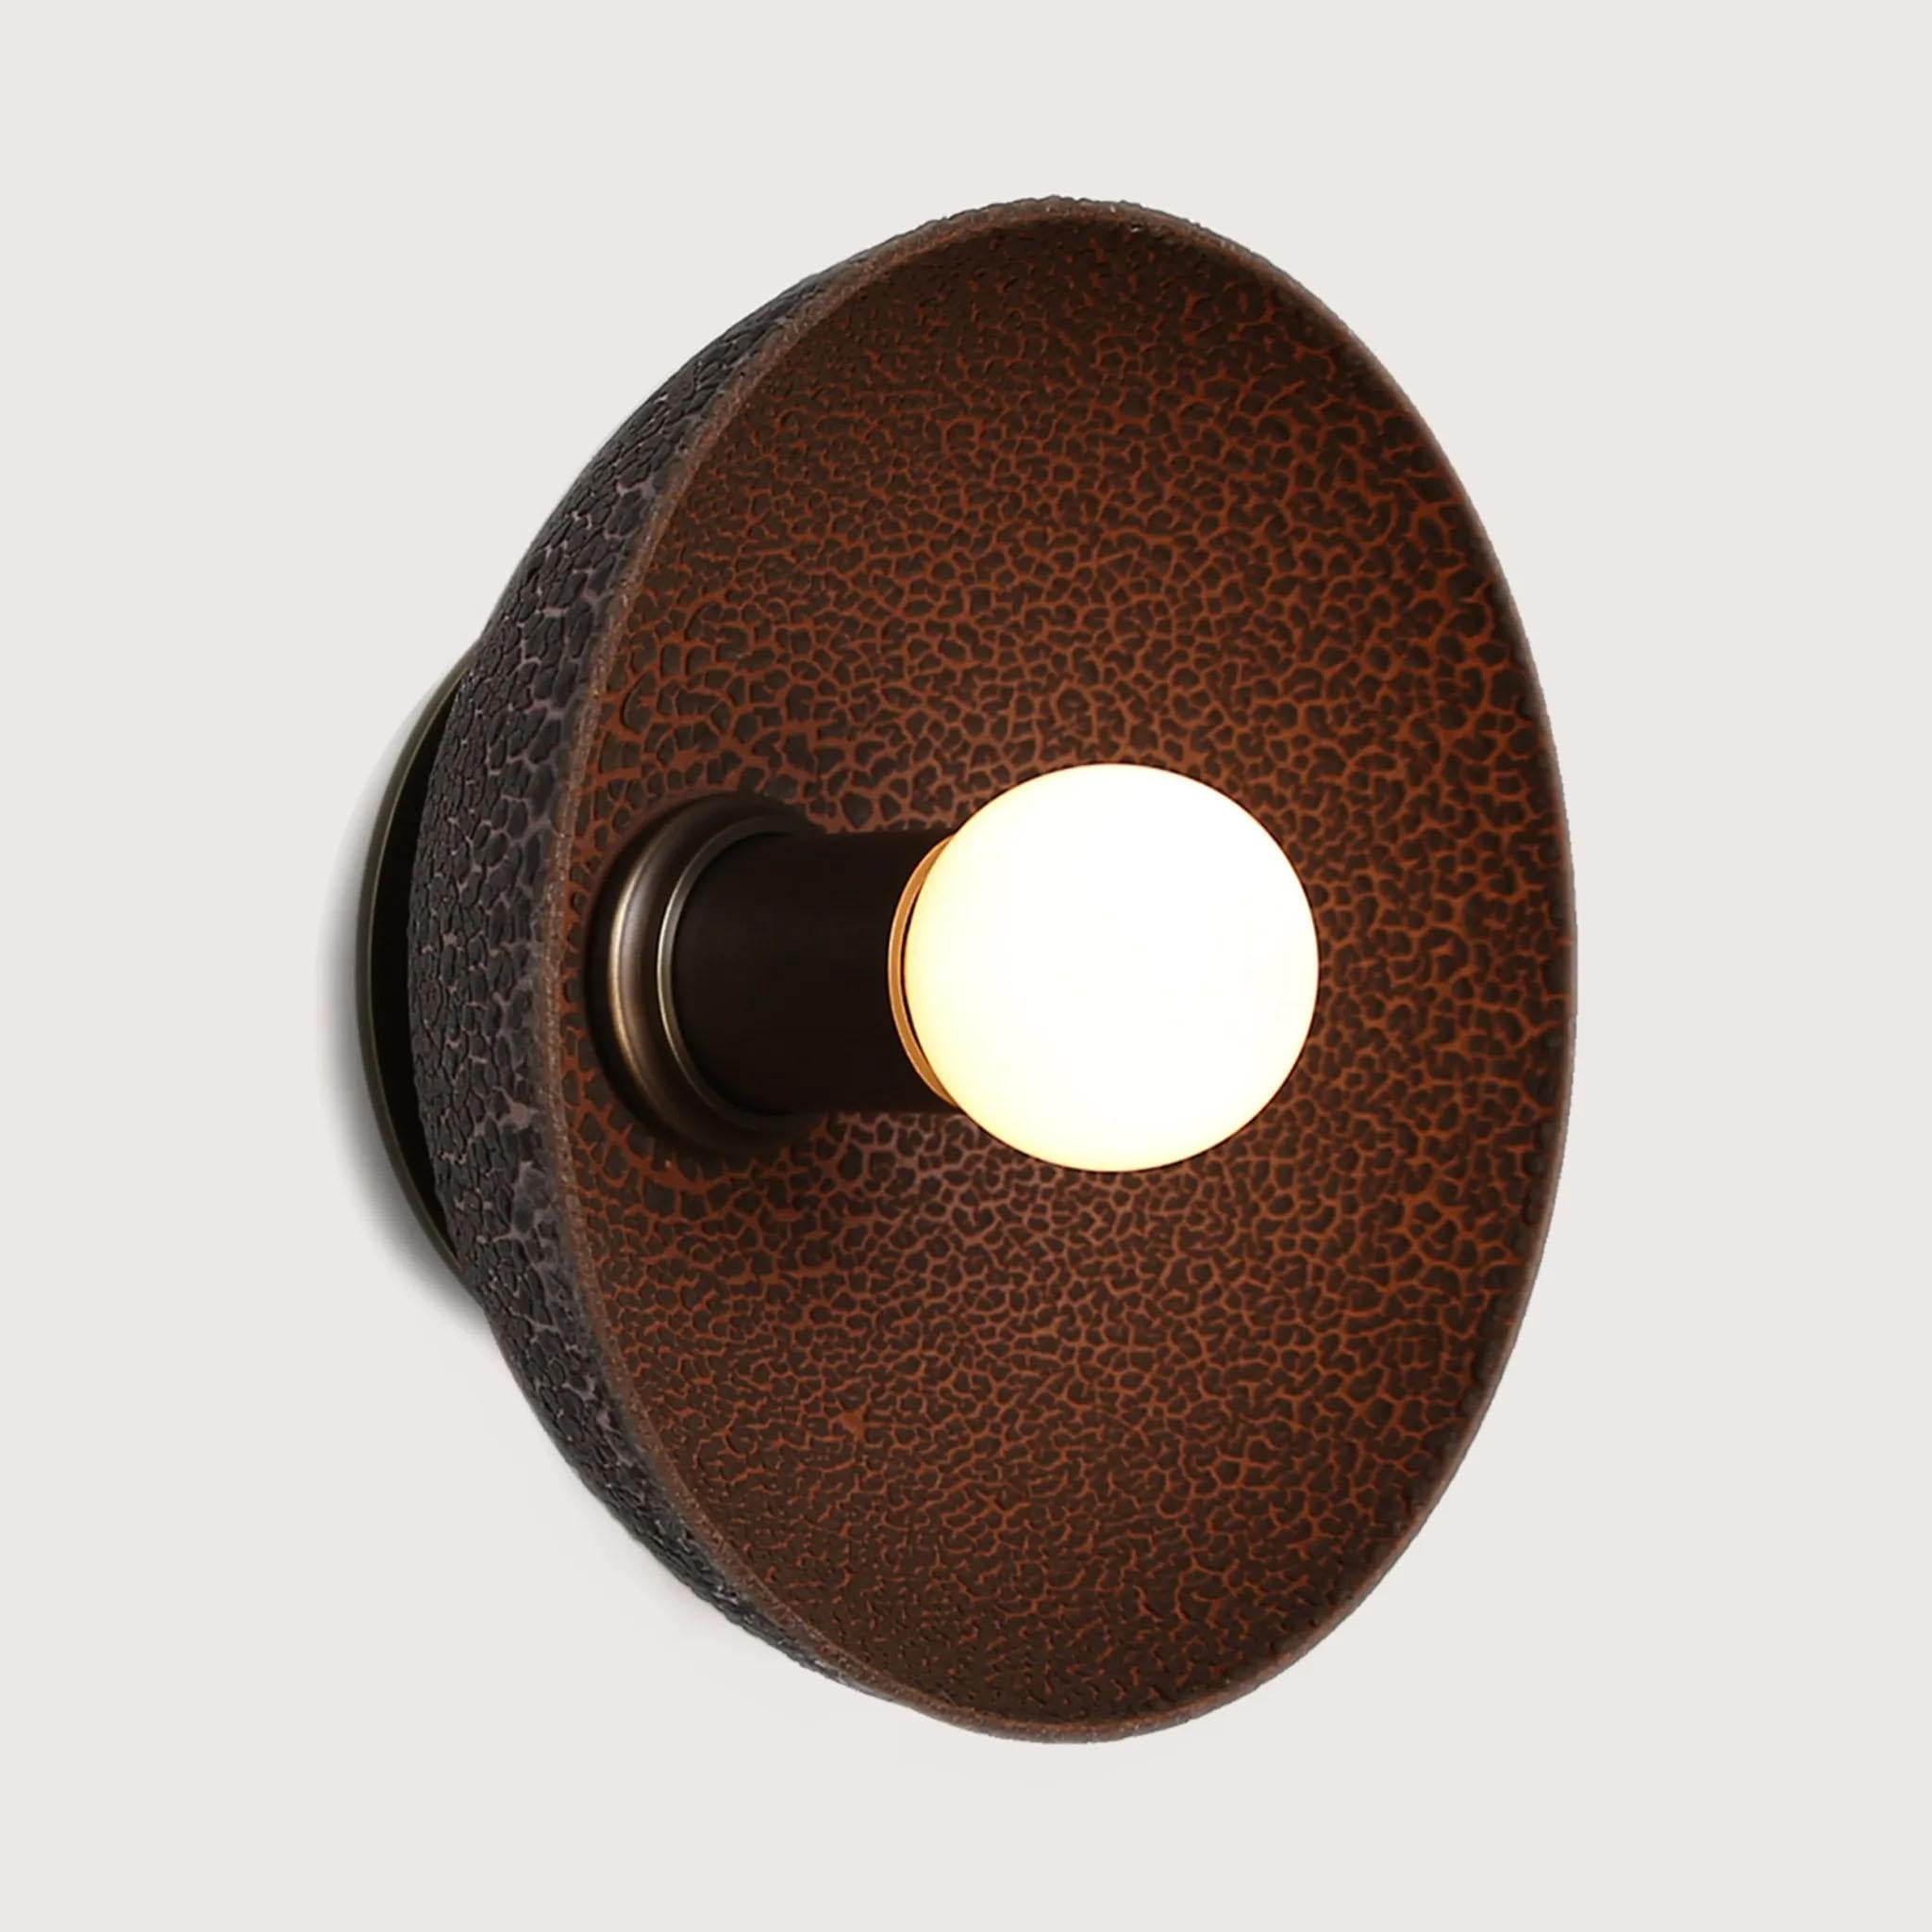 The Emmet sconce, large ADA, is hand-cast terracotta and glazed with either a matte or textured lichen glaze and is made specifically for settings that need to meet ADA standards. The lichen glaze produces a beautiful, organic texture that lets the